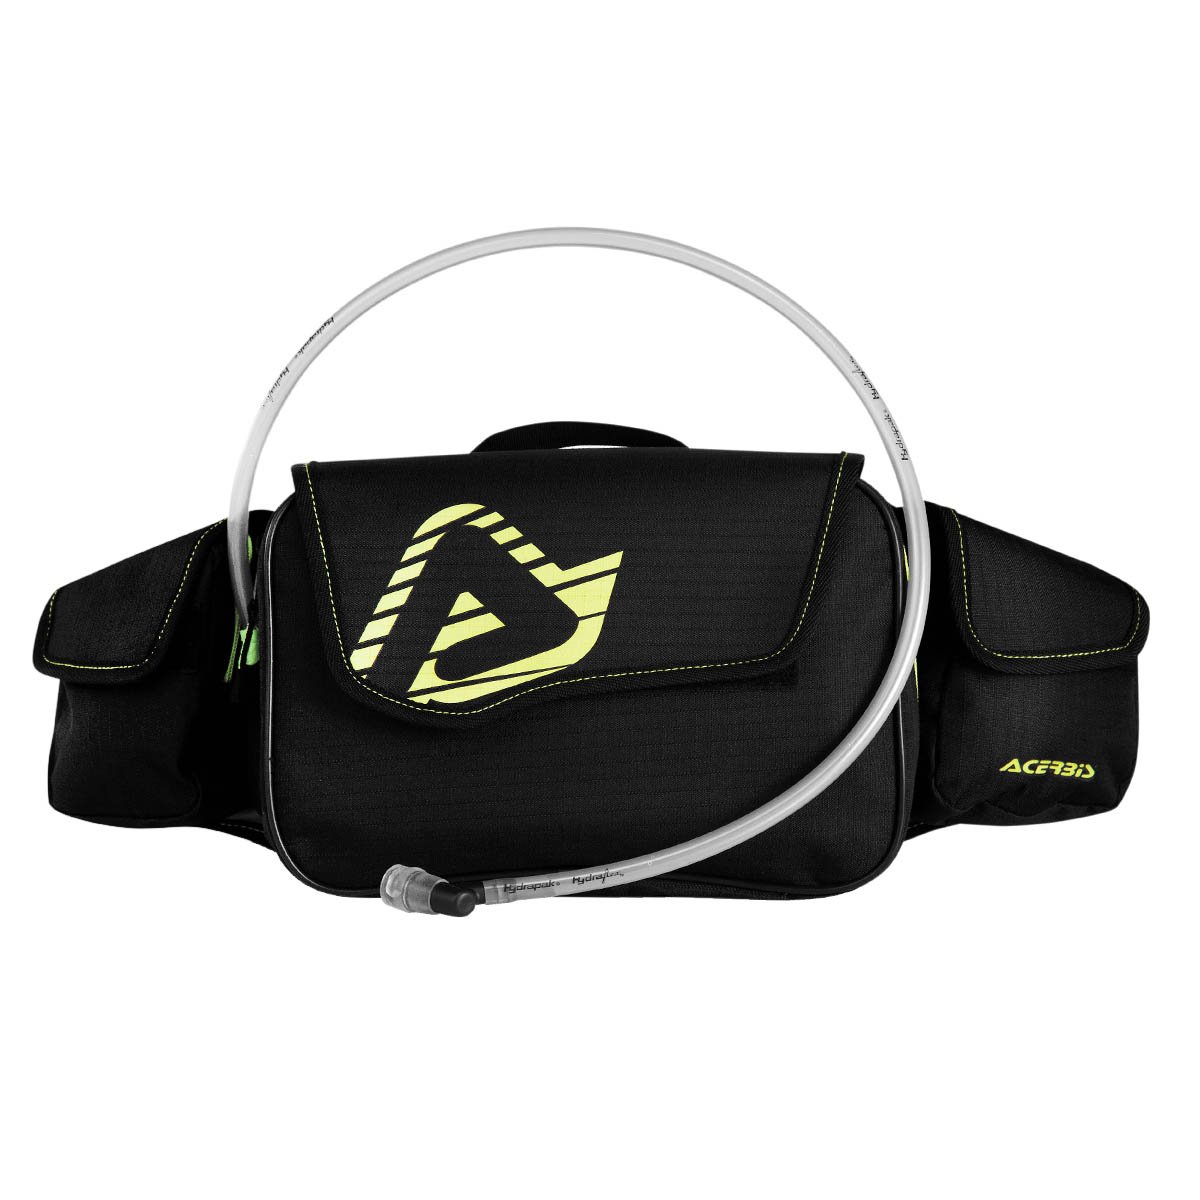 Acerbis Waist Bag with Hydration System Dromy Black/Fluo Yellow